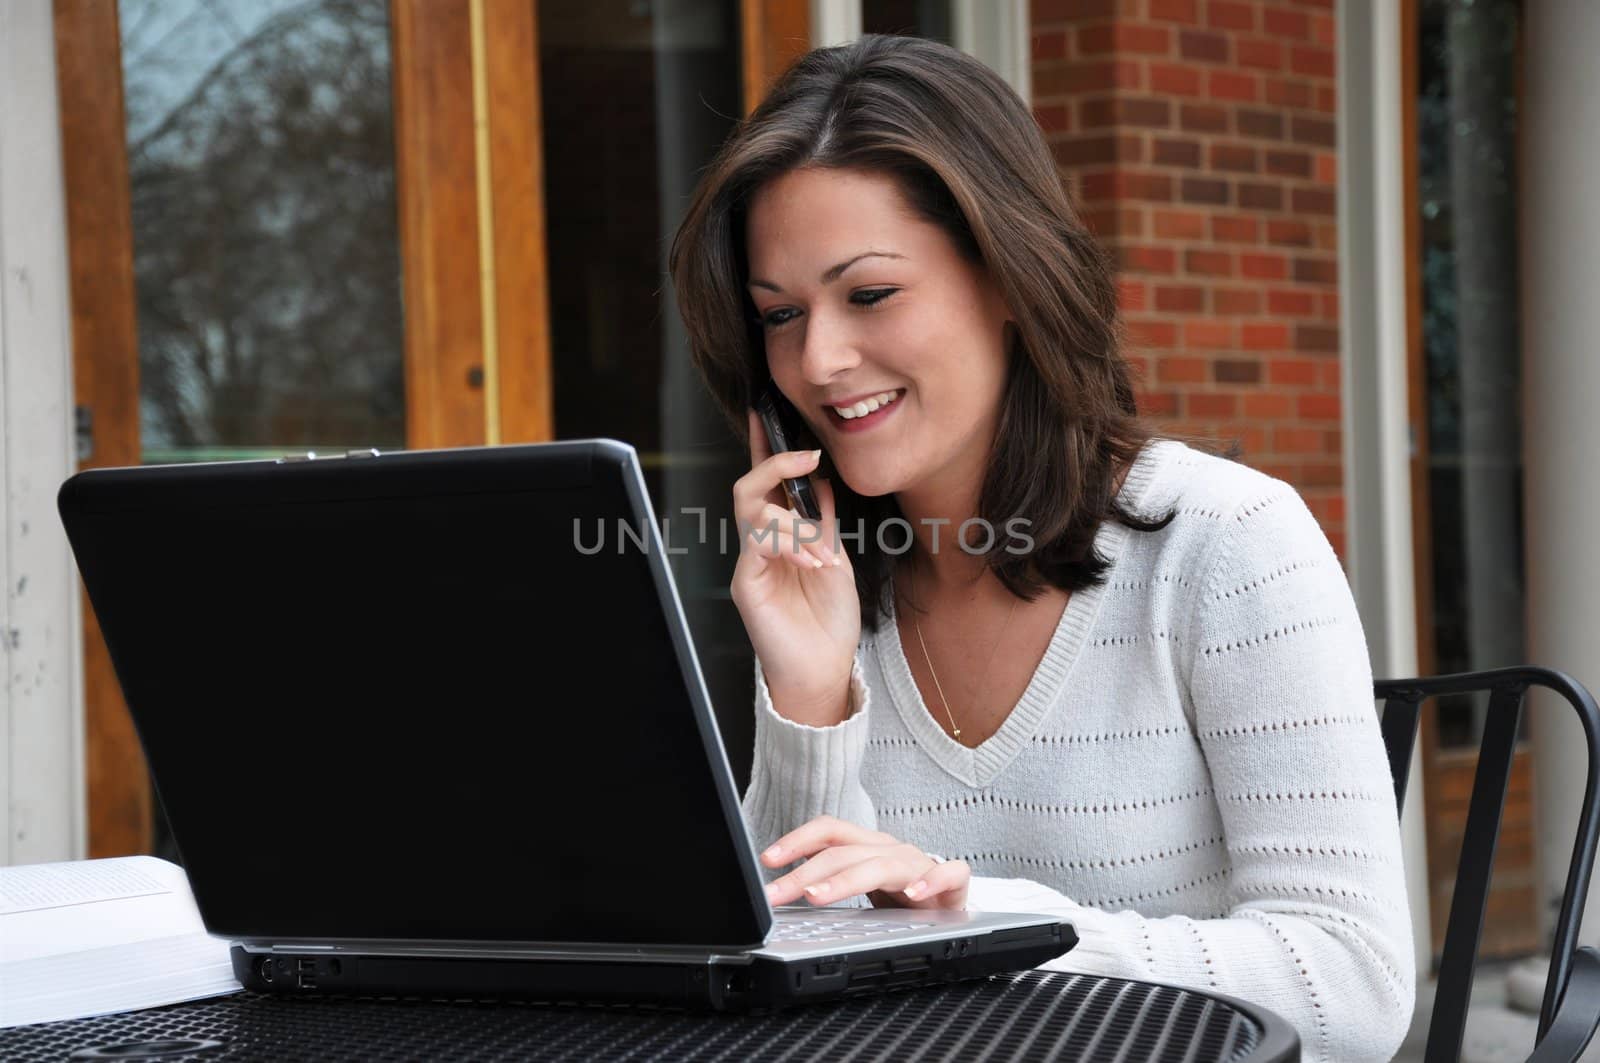 Female student using computer and talking on cellphone.